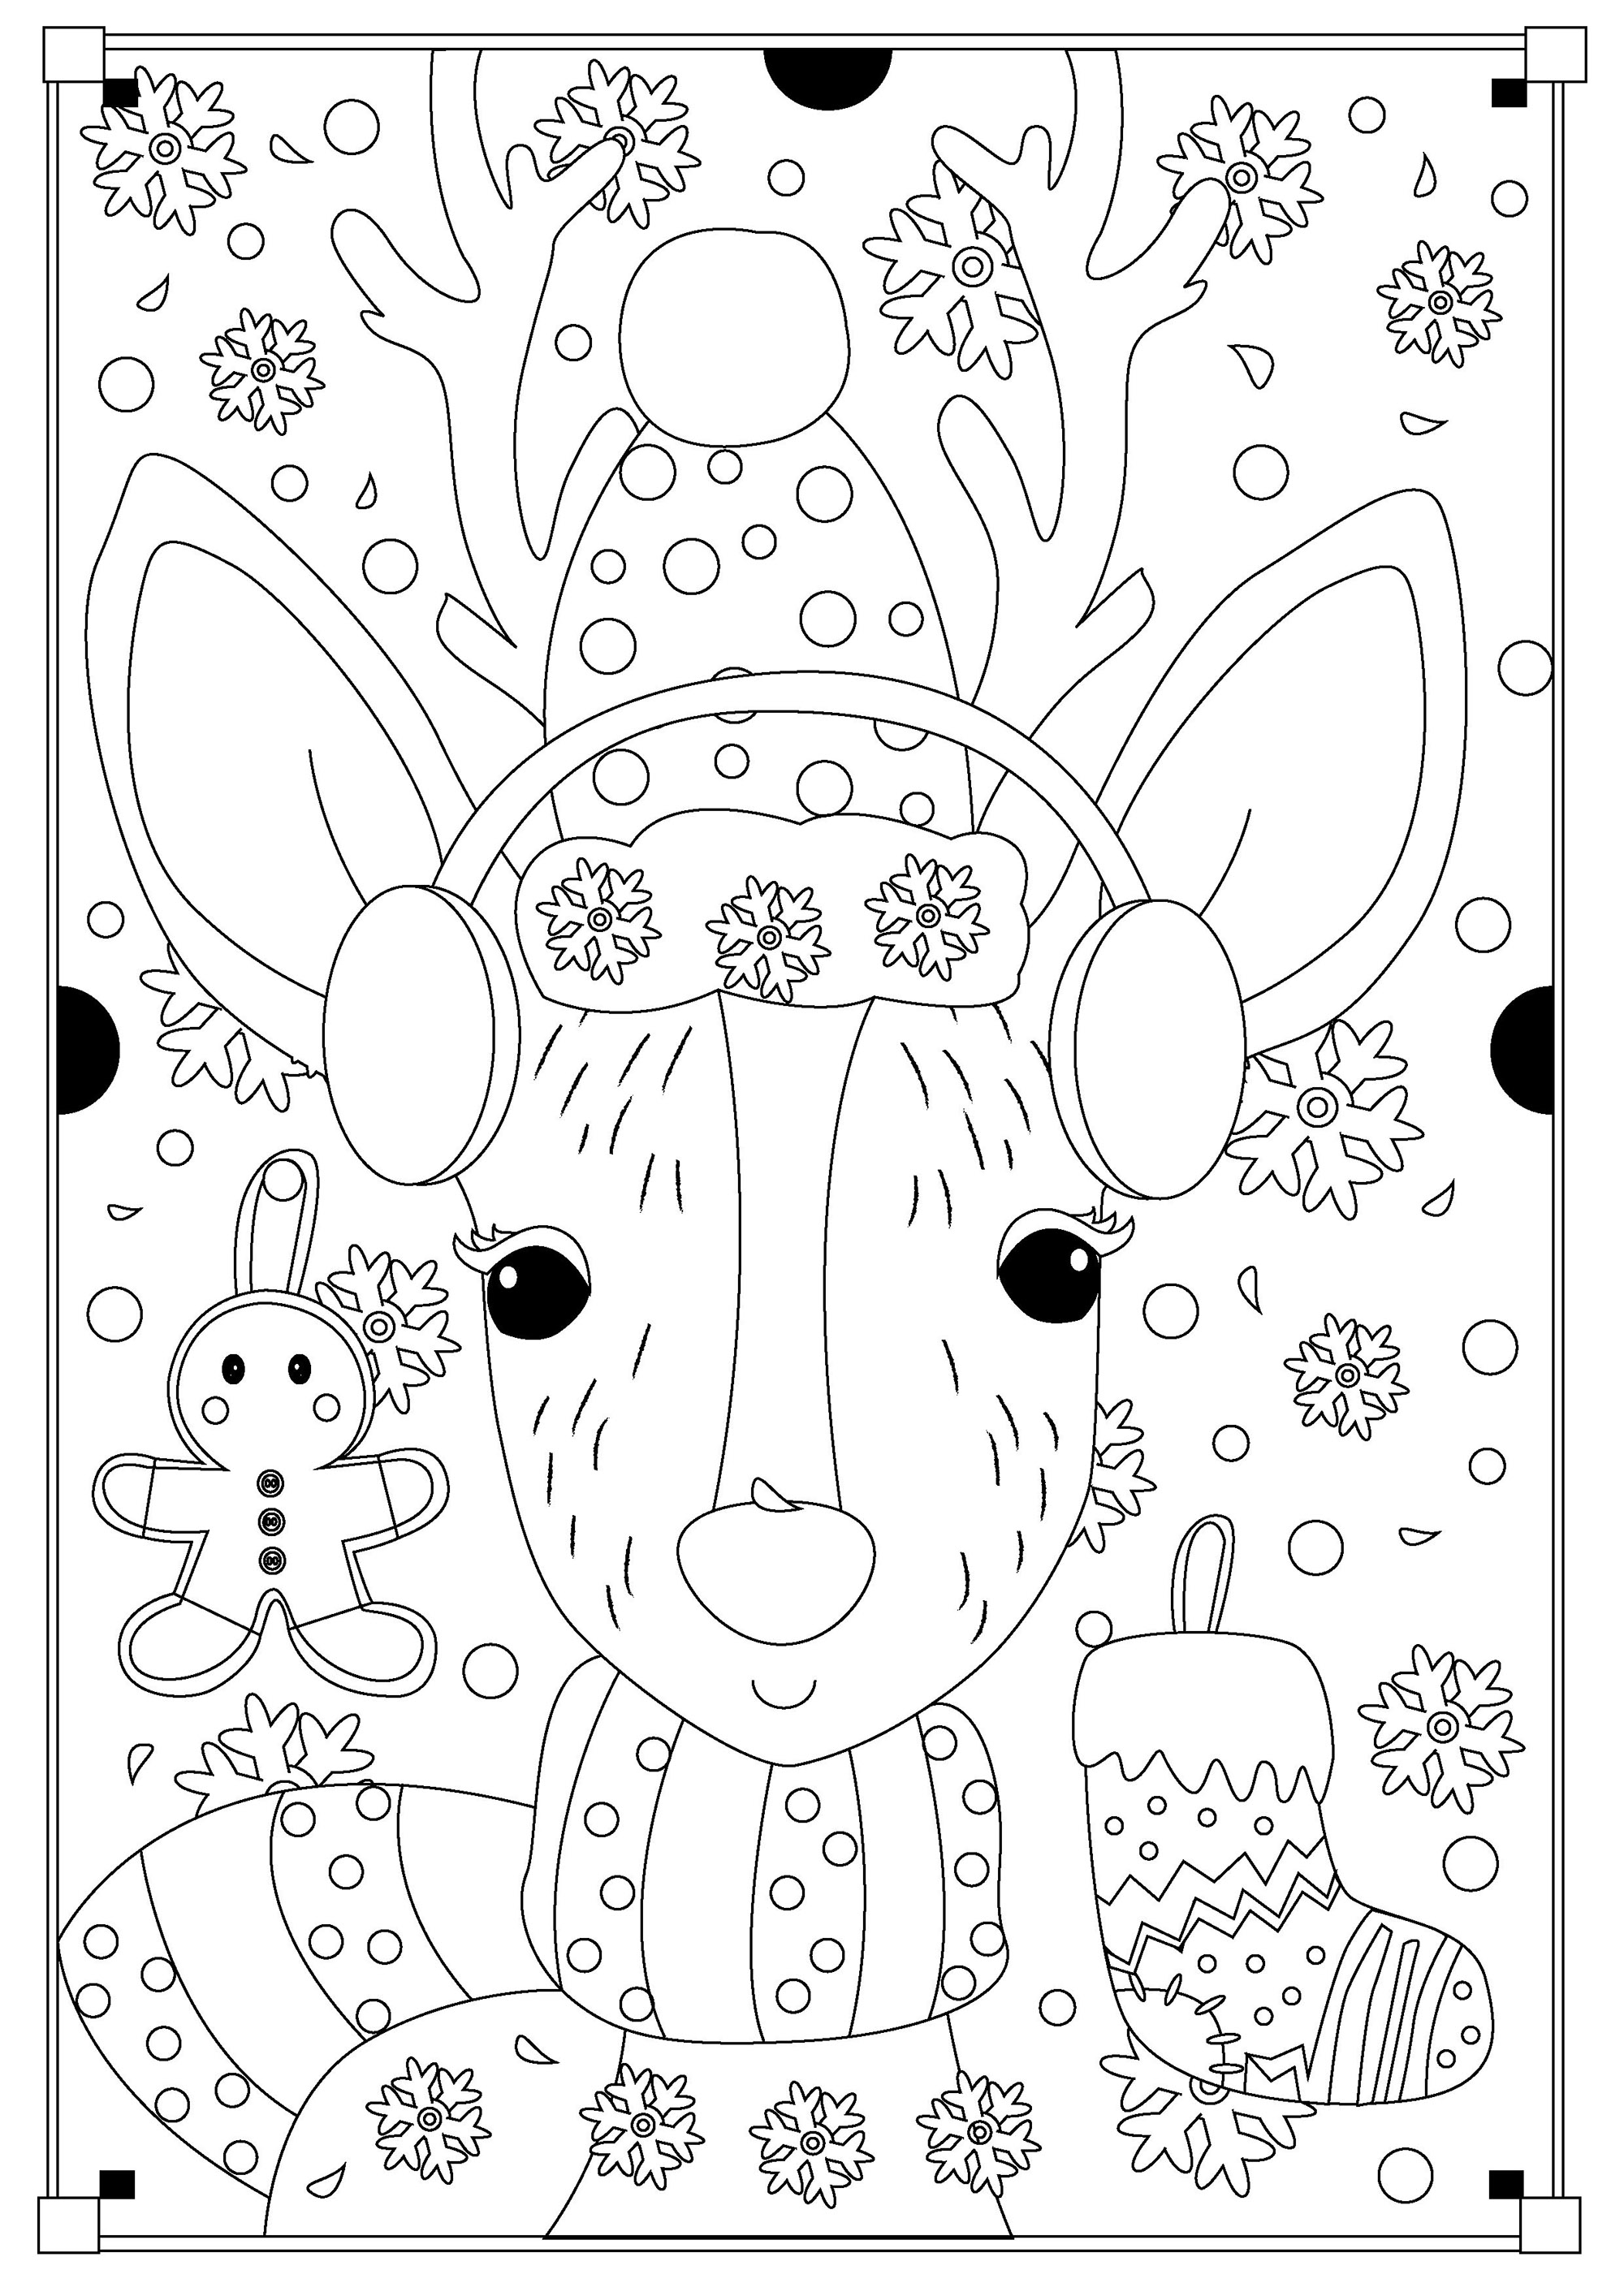 Santa's Reindeer surrounded by many coloring elements, Artist : Gaelle Picard